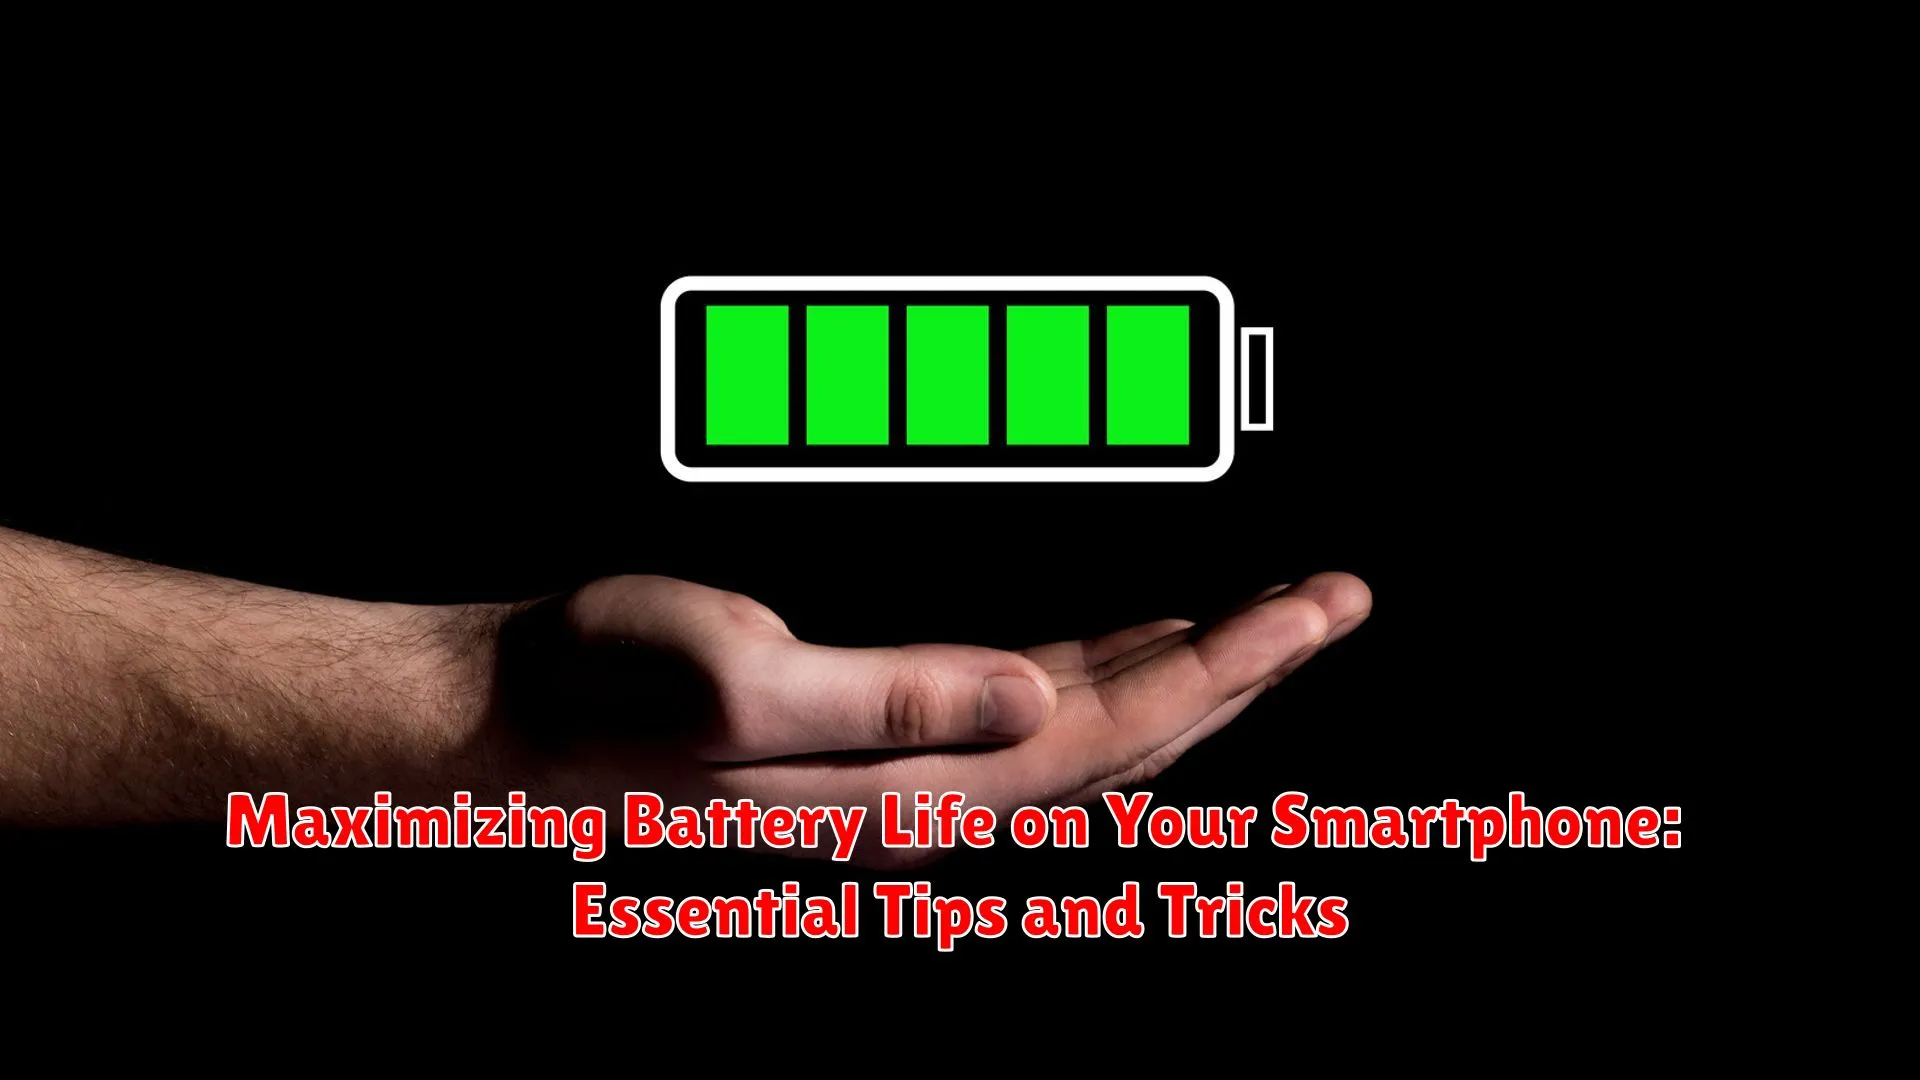 Maximizing Battery Life on Your Smartphone: Essential Tips and Tricks